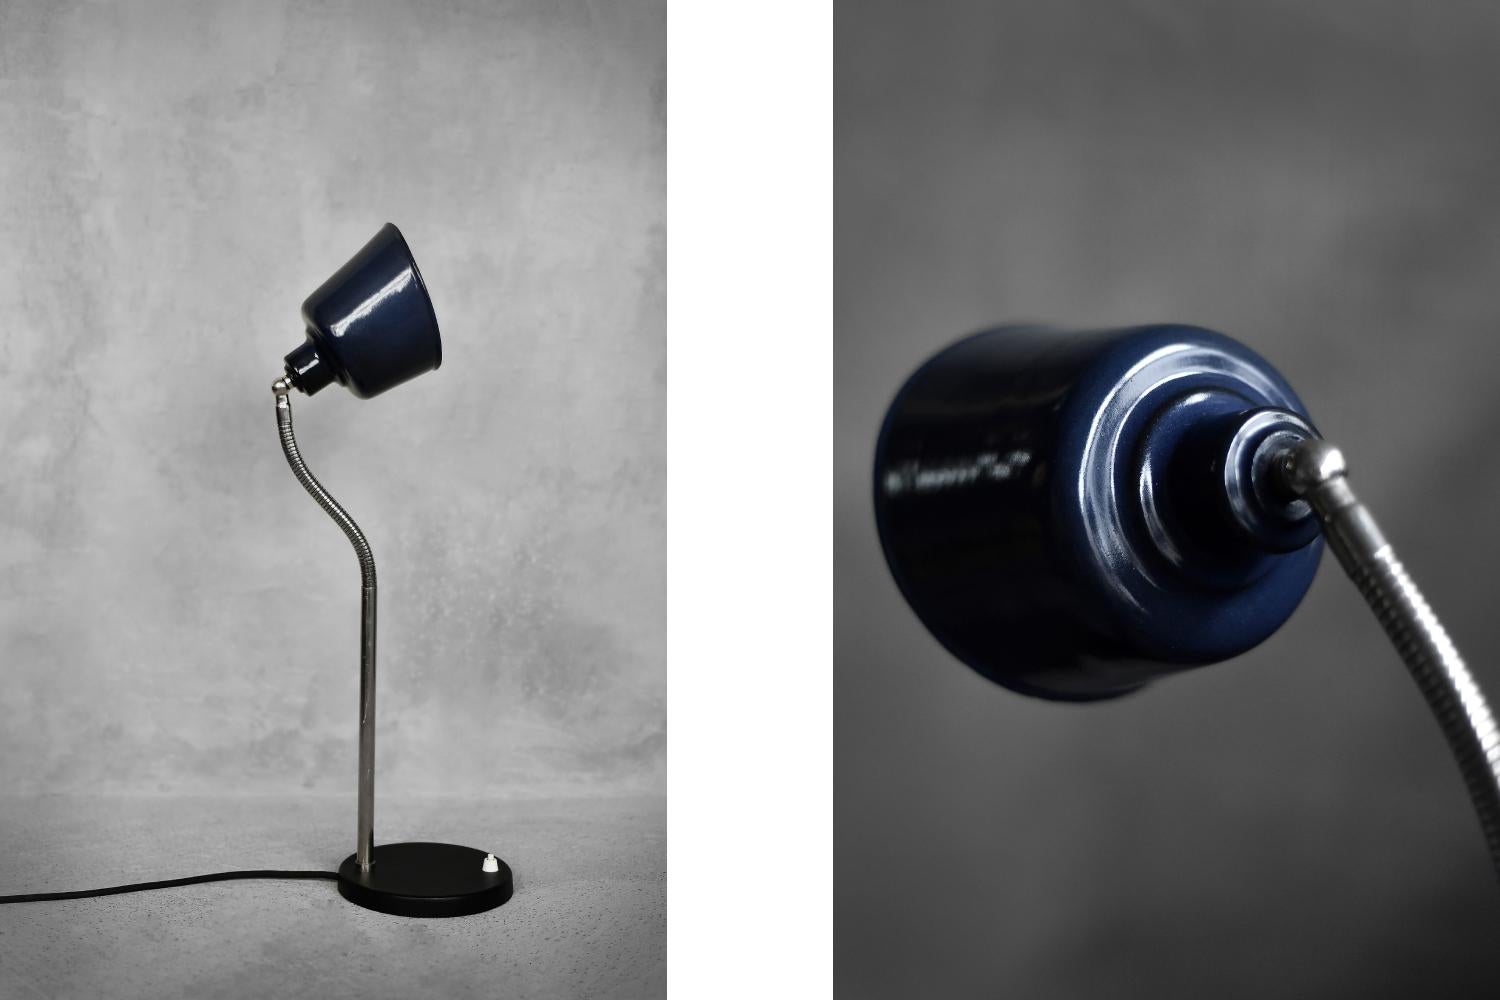 This classic desk lamp was produced in Poland during the 1950s. The lamp has a solid base made of cast iron, varnished black. A flexible, chrome-plated arm, the so-called 